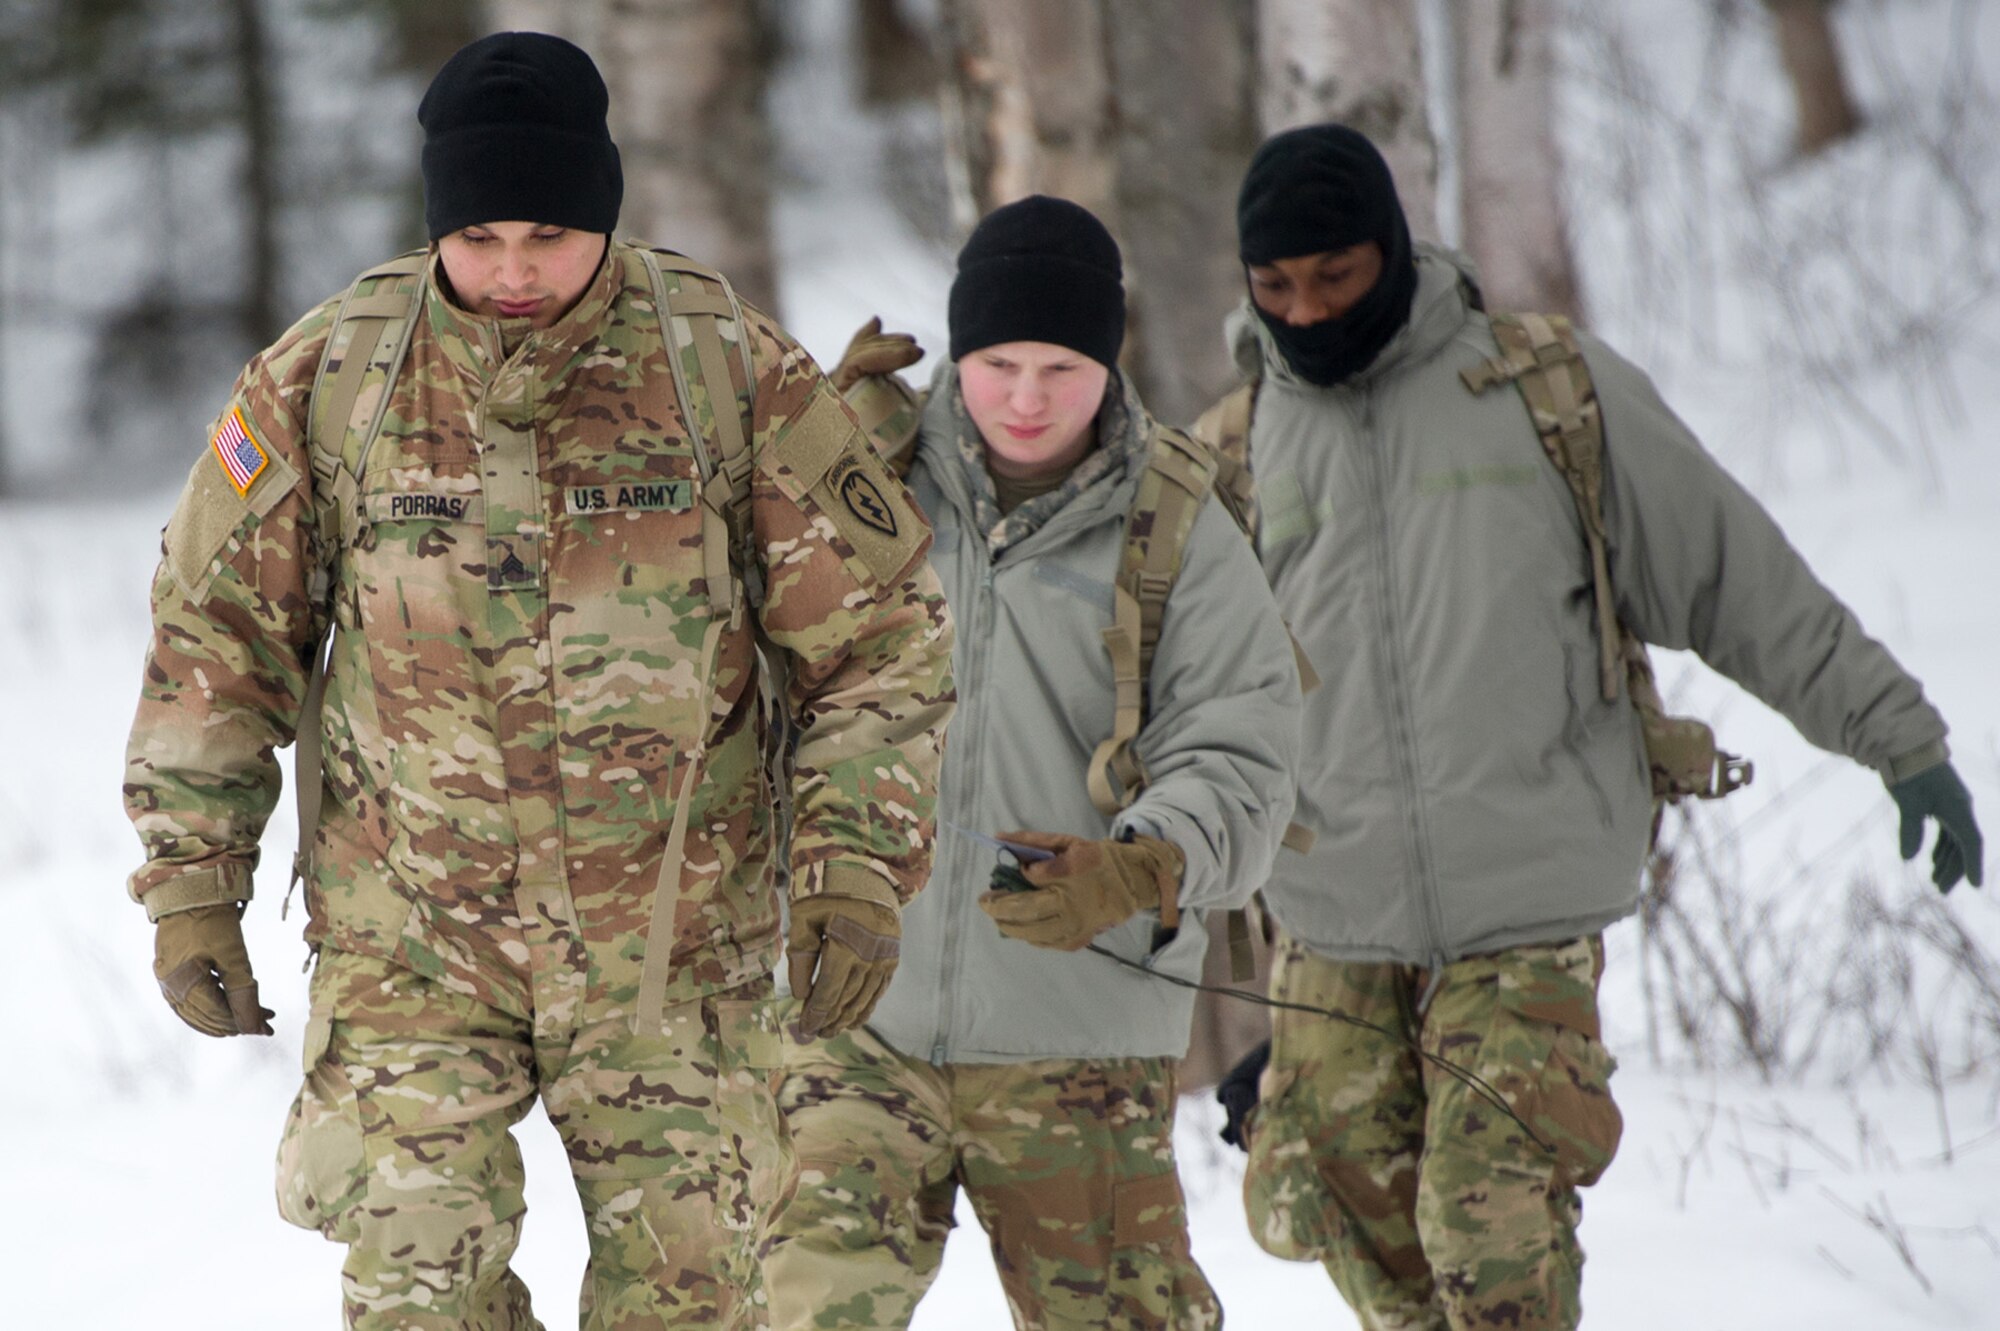 Army Sgt. Carlos Porras, a native of Burlington, NC, assigned to Hawk Company, 3rd Battalion, 509th Parachute Infantry Regiment, 4th Infantry Brigade Combat Team (Airborne), 25th Infantry Division, U.S. Army Alaska, leads Soldiers over an icy berm during a land navigation course on Joint Base Elmendorf-Richardson, Alaska, April 4, 2018.  The Soldiers used their skills to plot courses using a lensatic compass, protractor, and a 1:25,000 scale map to navigate to, and locate points using provided grid coordinates within a predetermined time.